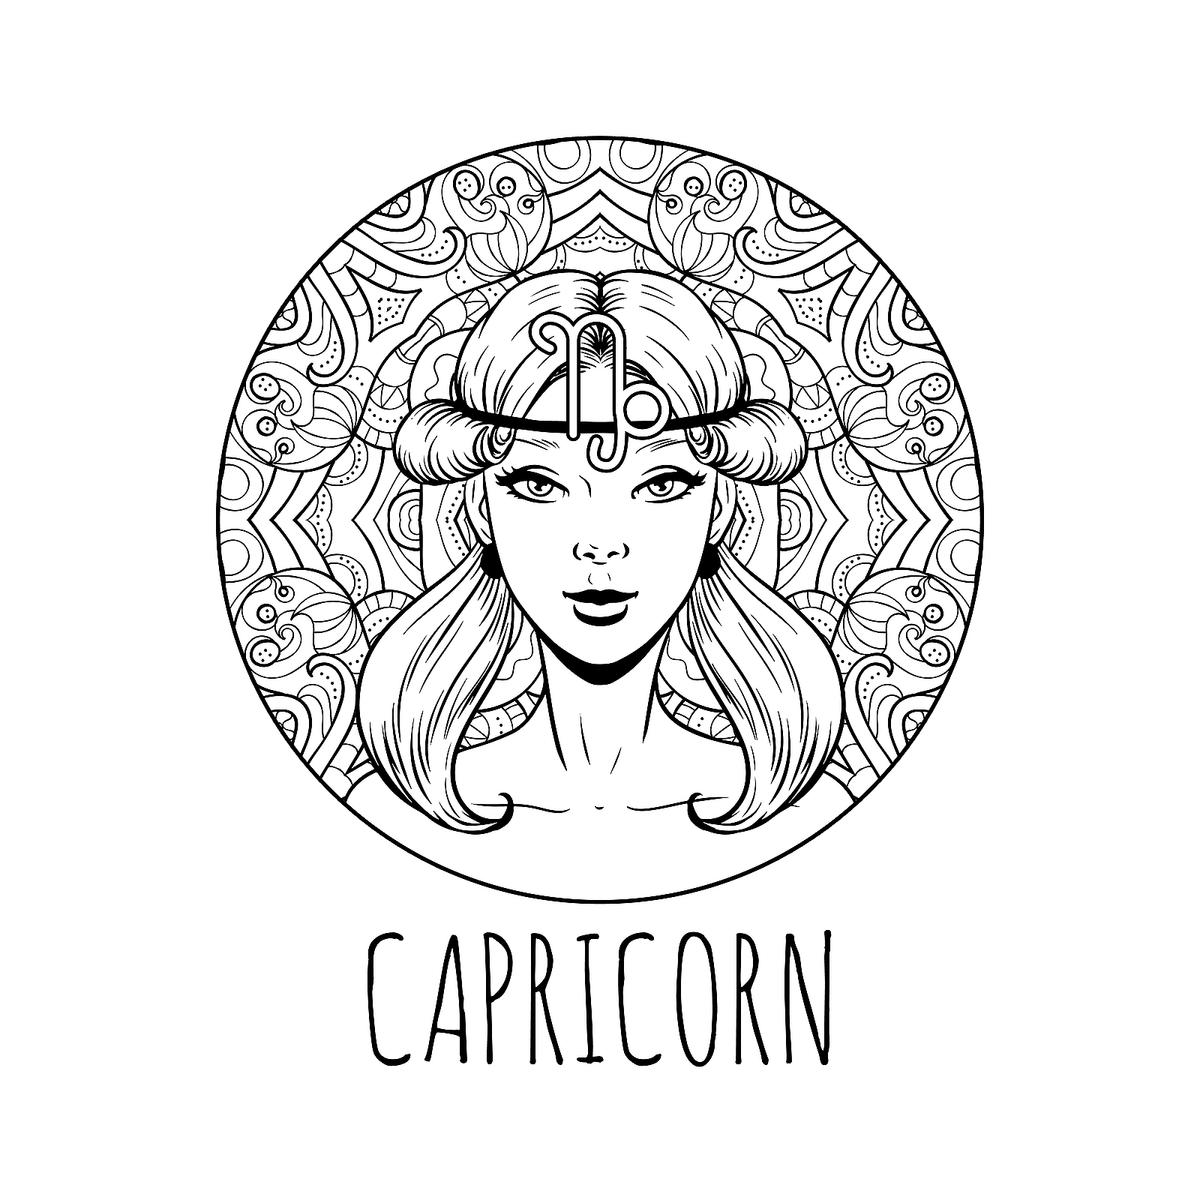 Cancer zodiac sign coloring page